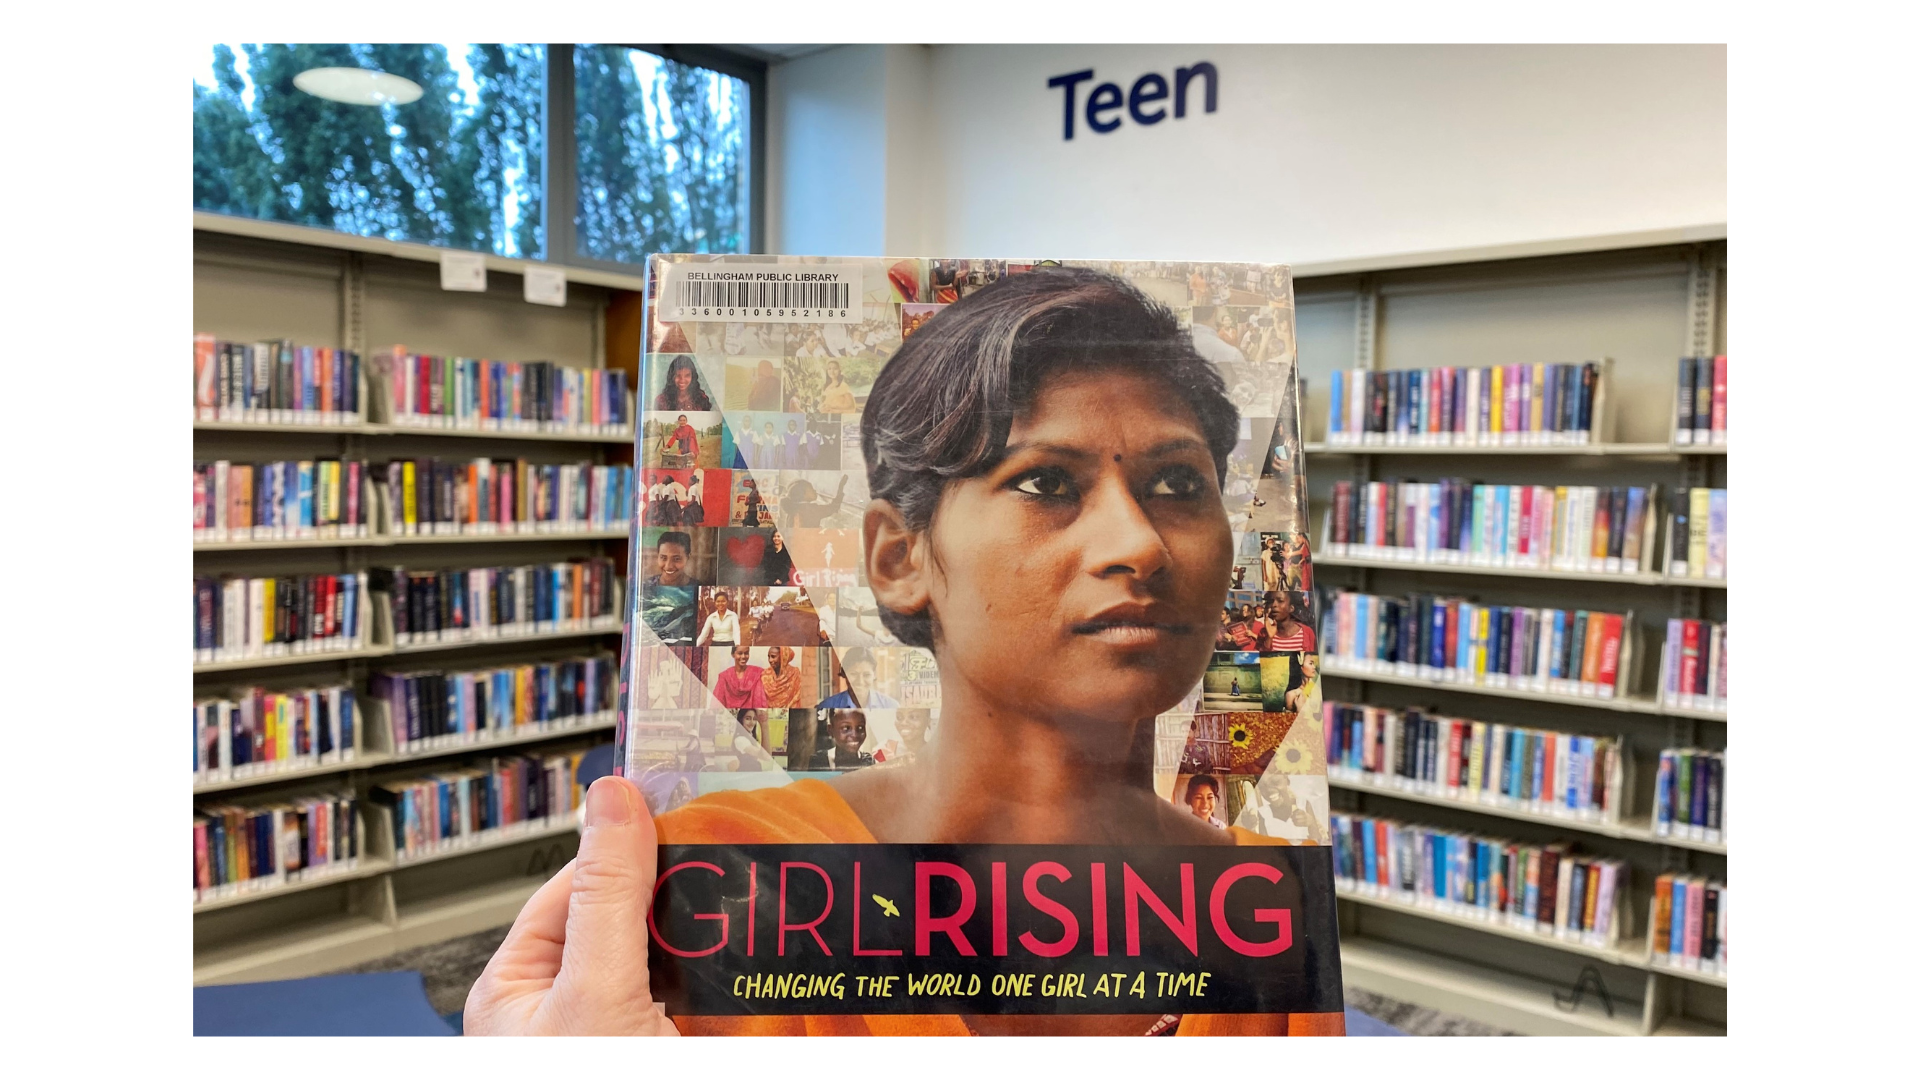 cover of the book titled "Girl Rising"